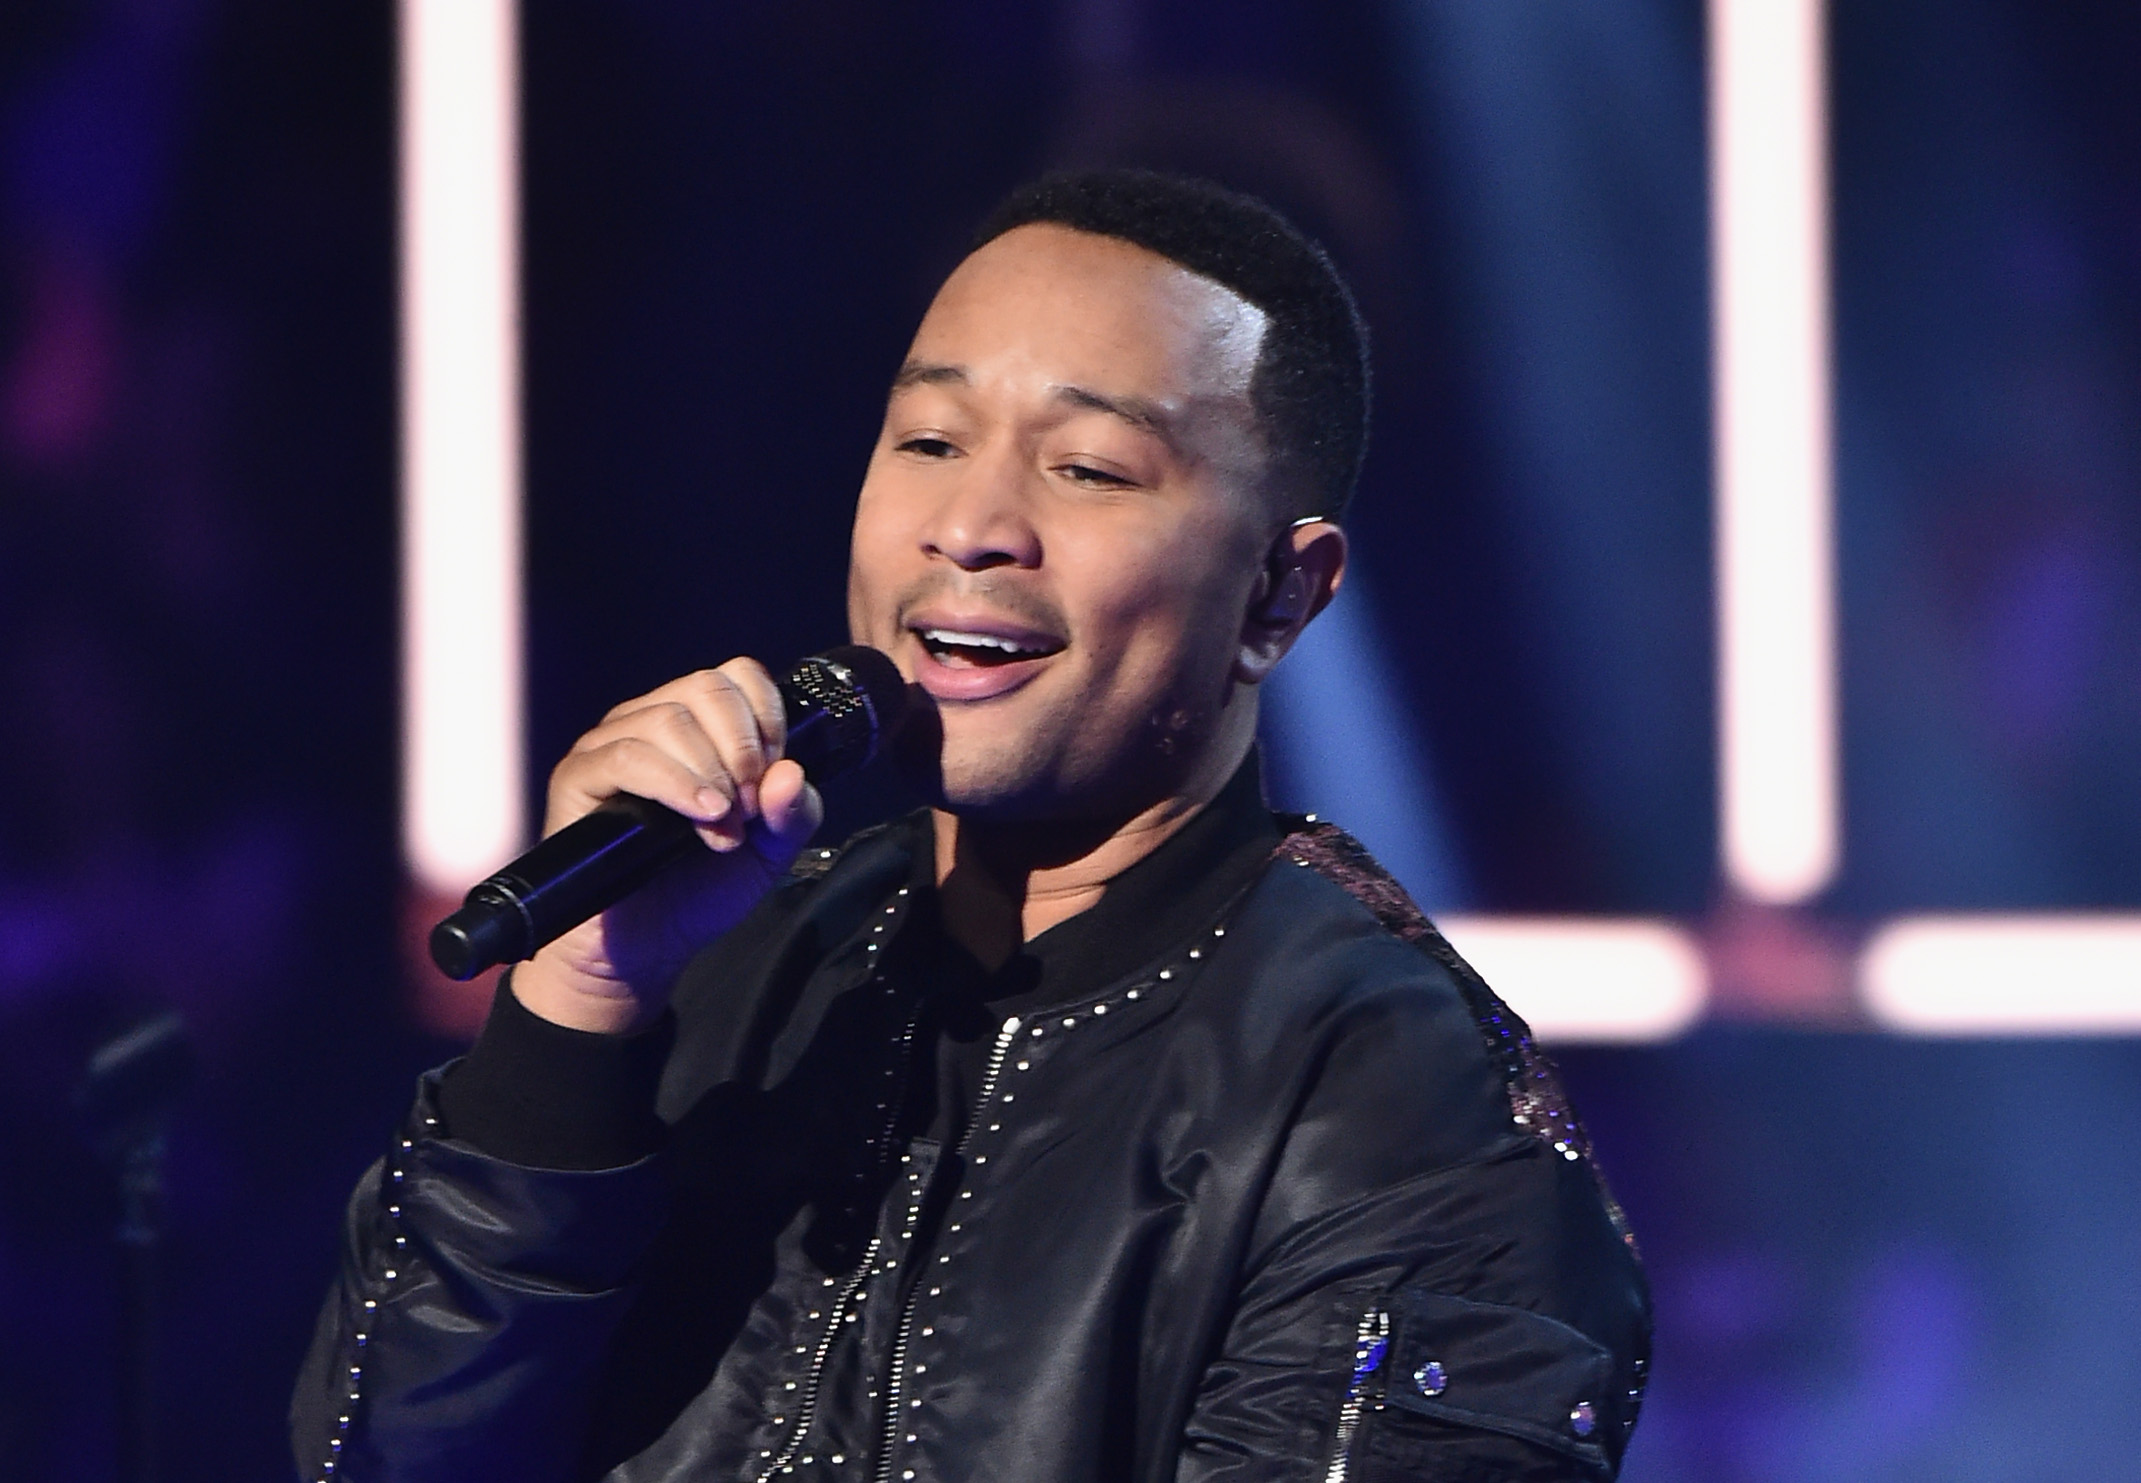 John Legend's Net Worth 5 Fast Facts You Need to Know